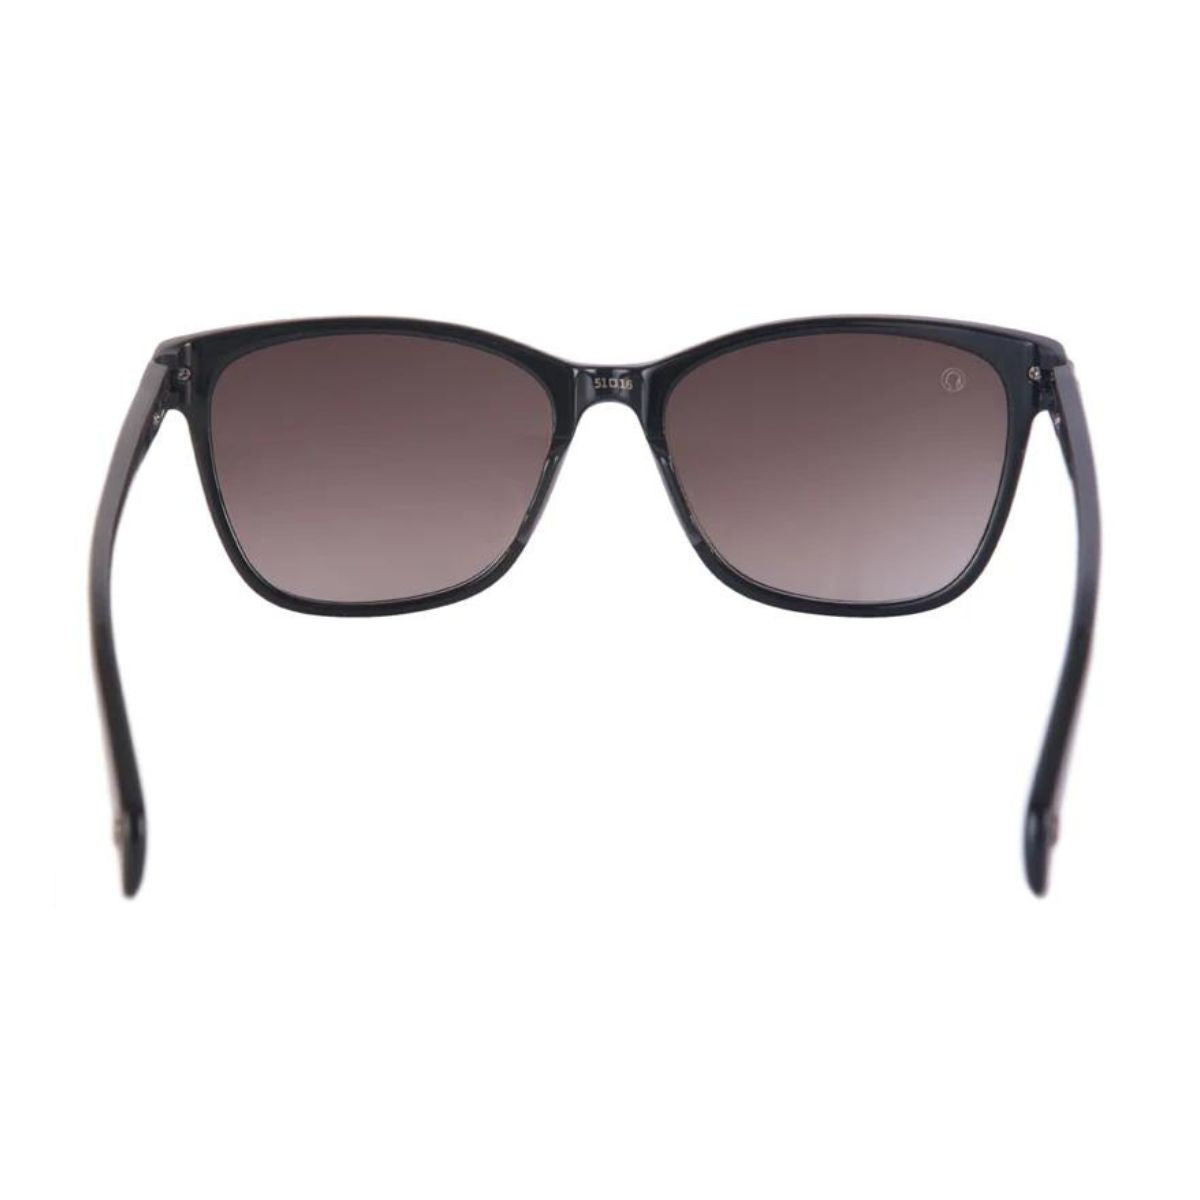 "The Monk Florence N C1 Stylish Sunglass For Women's At Optorium"